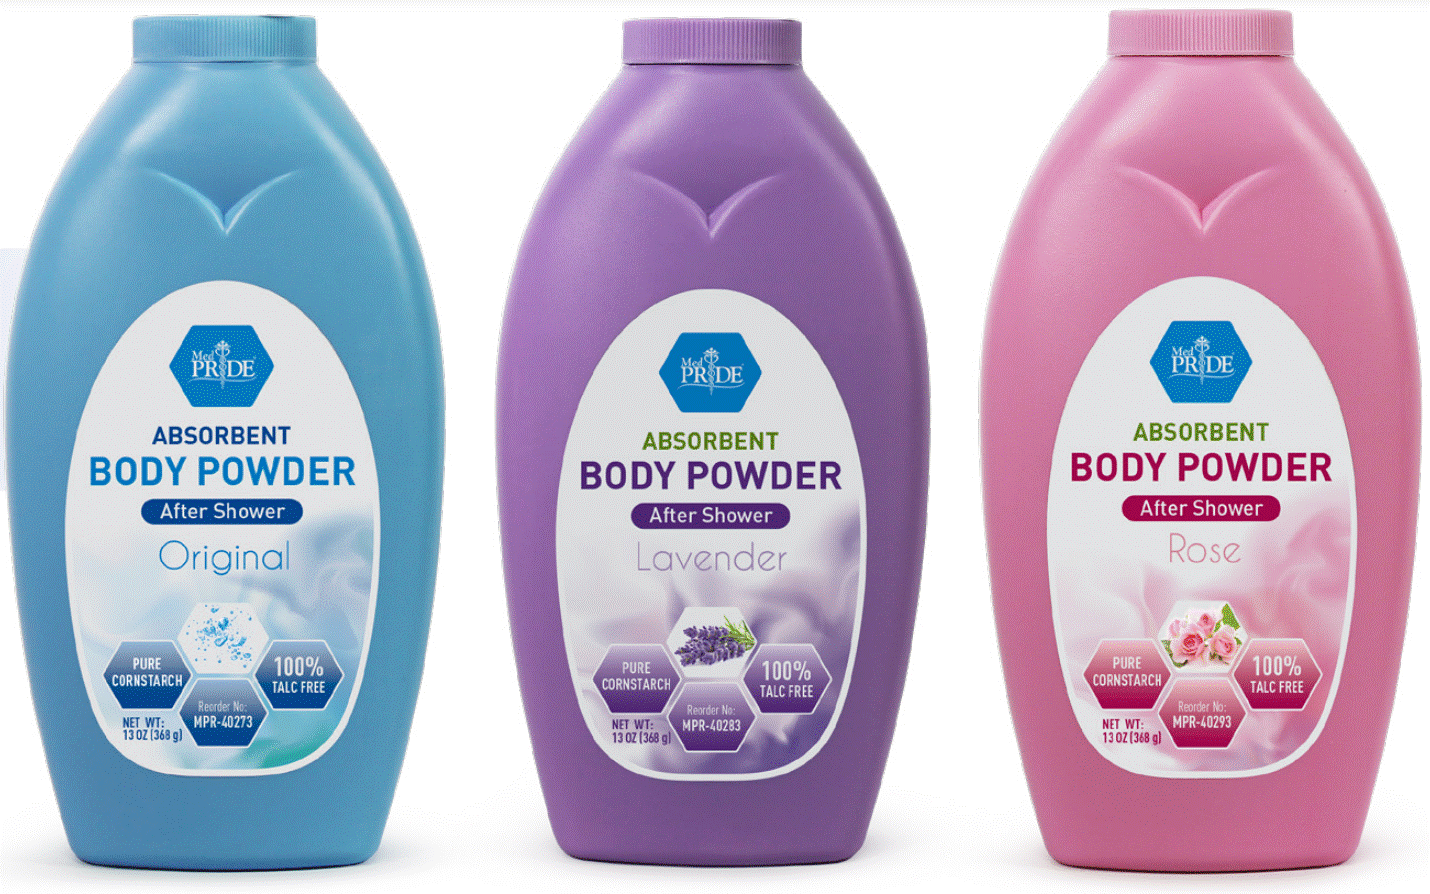 Baby Powder Products, Supplies and Equipment